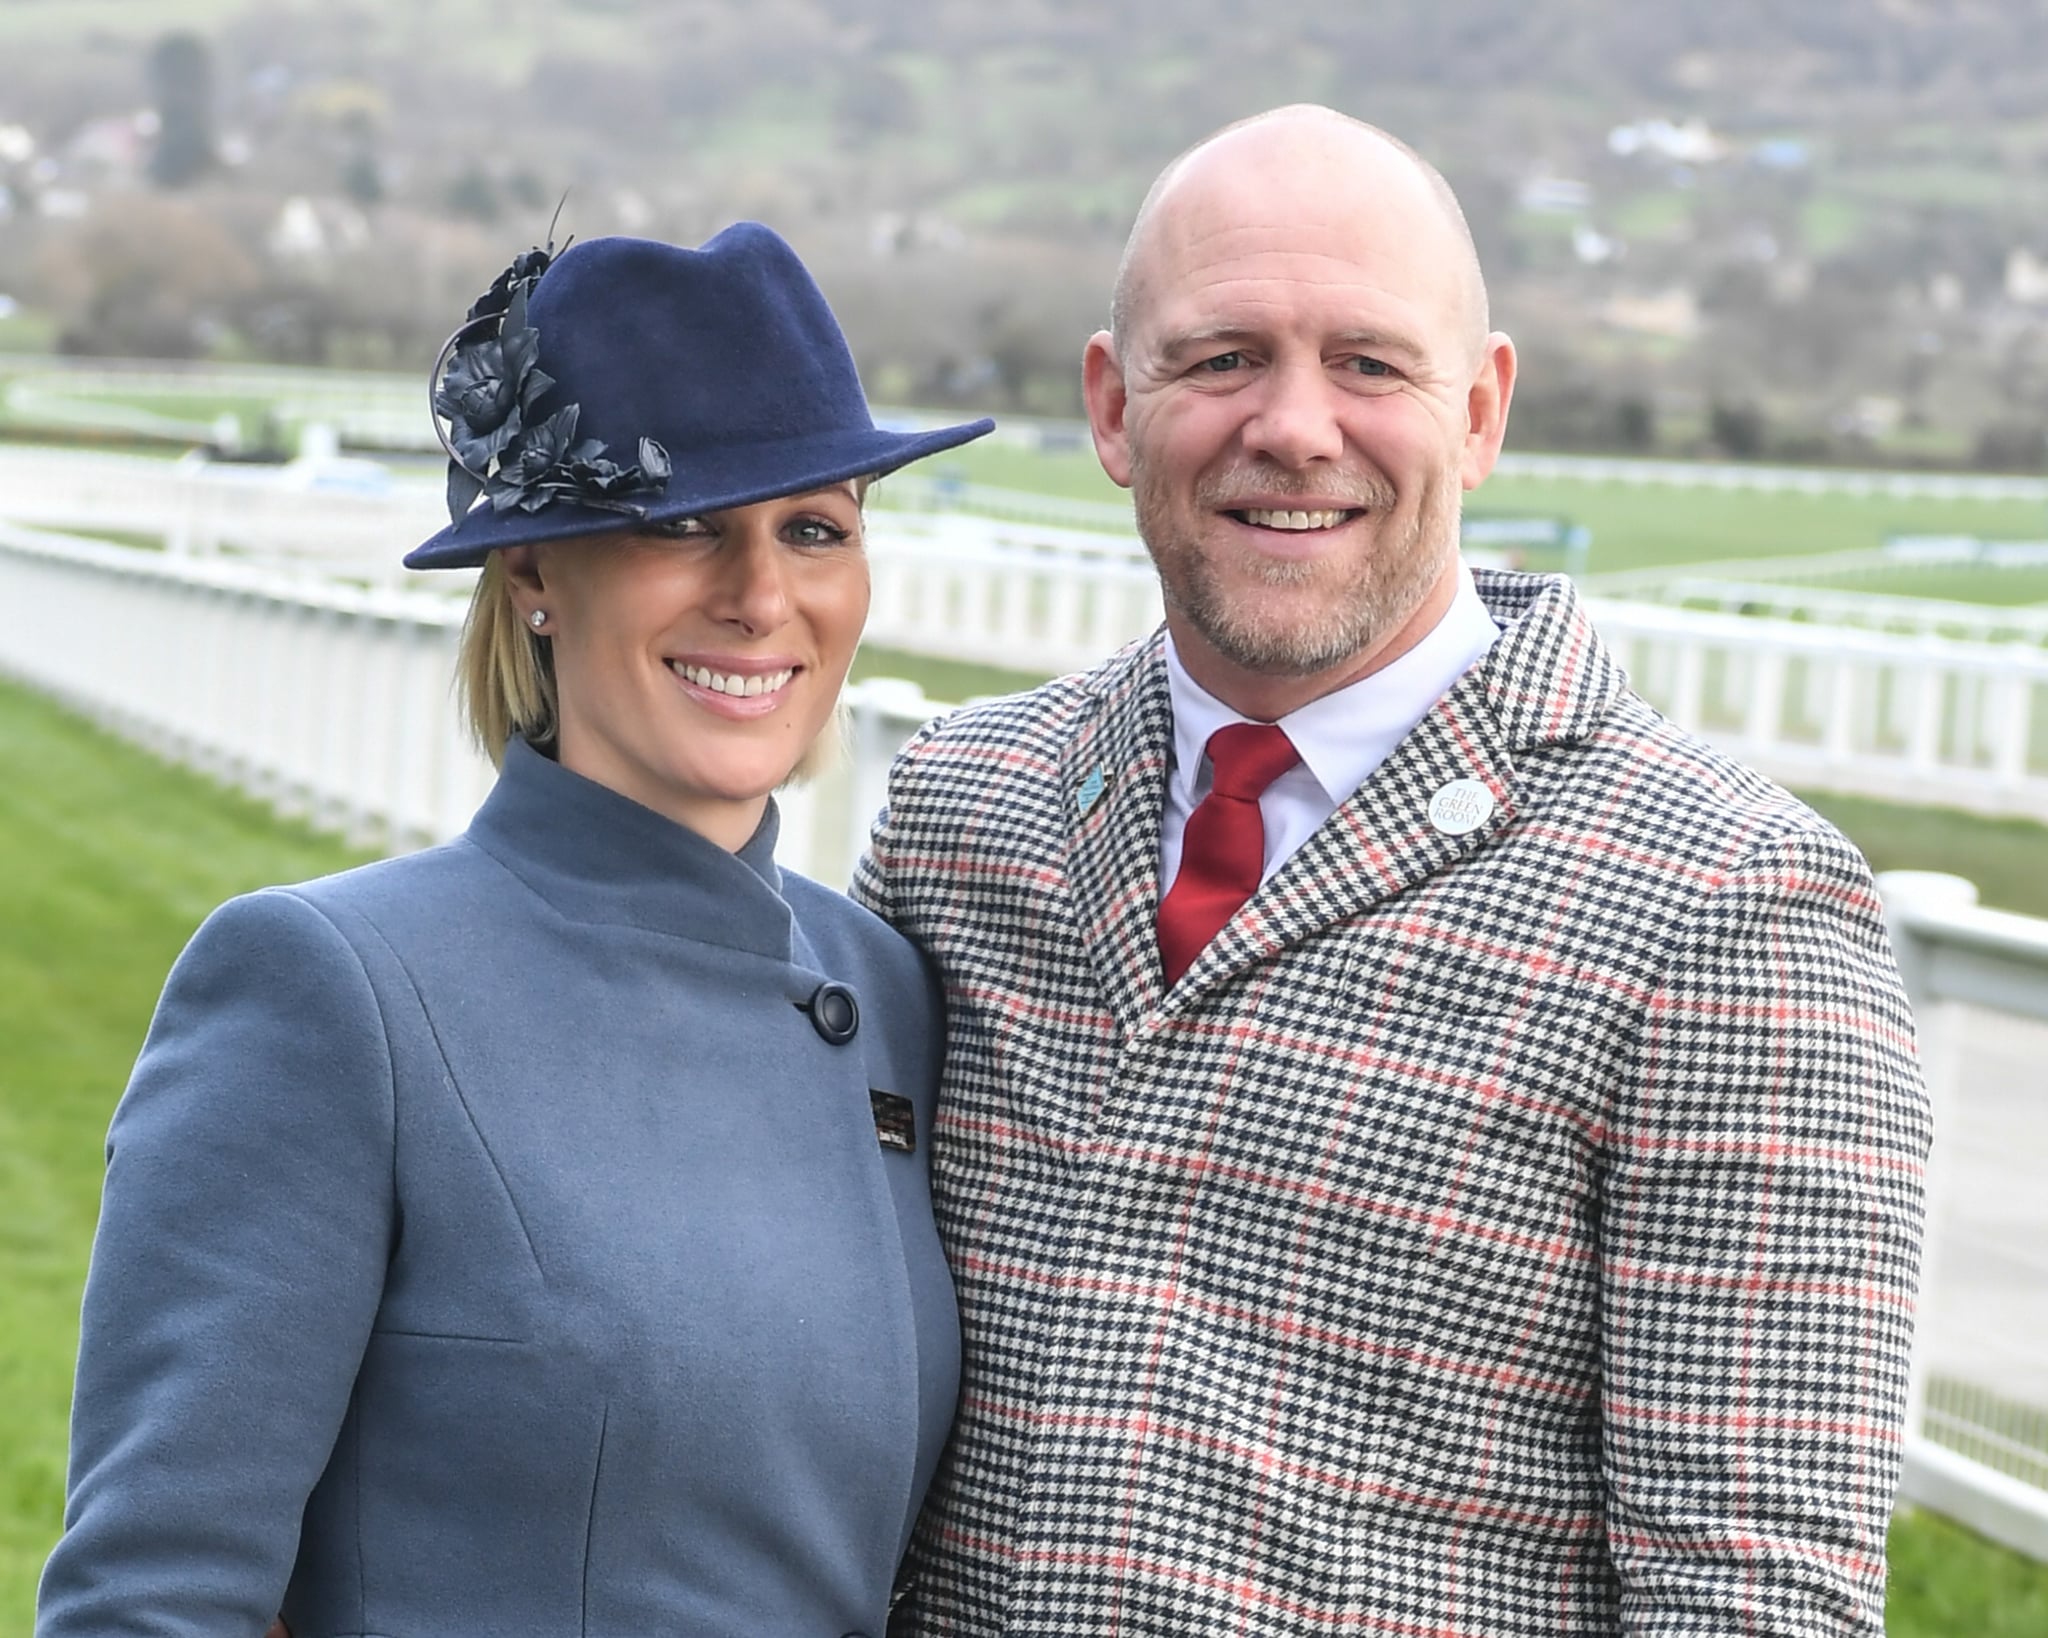 CHELTENHAM, ENGLAND - MARCH 12: Zara Tindall and Mike Tindall attend Day 3 of the Cheltenham Festival 2020 at Cheltenham Racecourse on March 12, 2020 in Cheltenham, England. (Photo by MelMedia/GC Images)